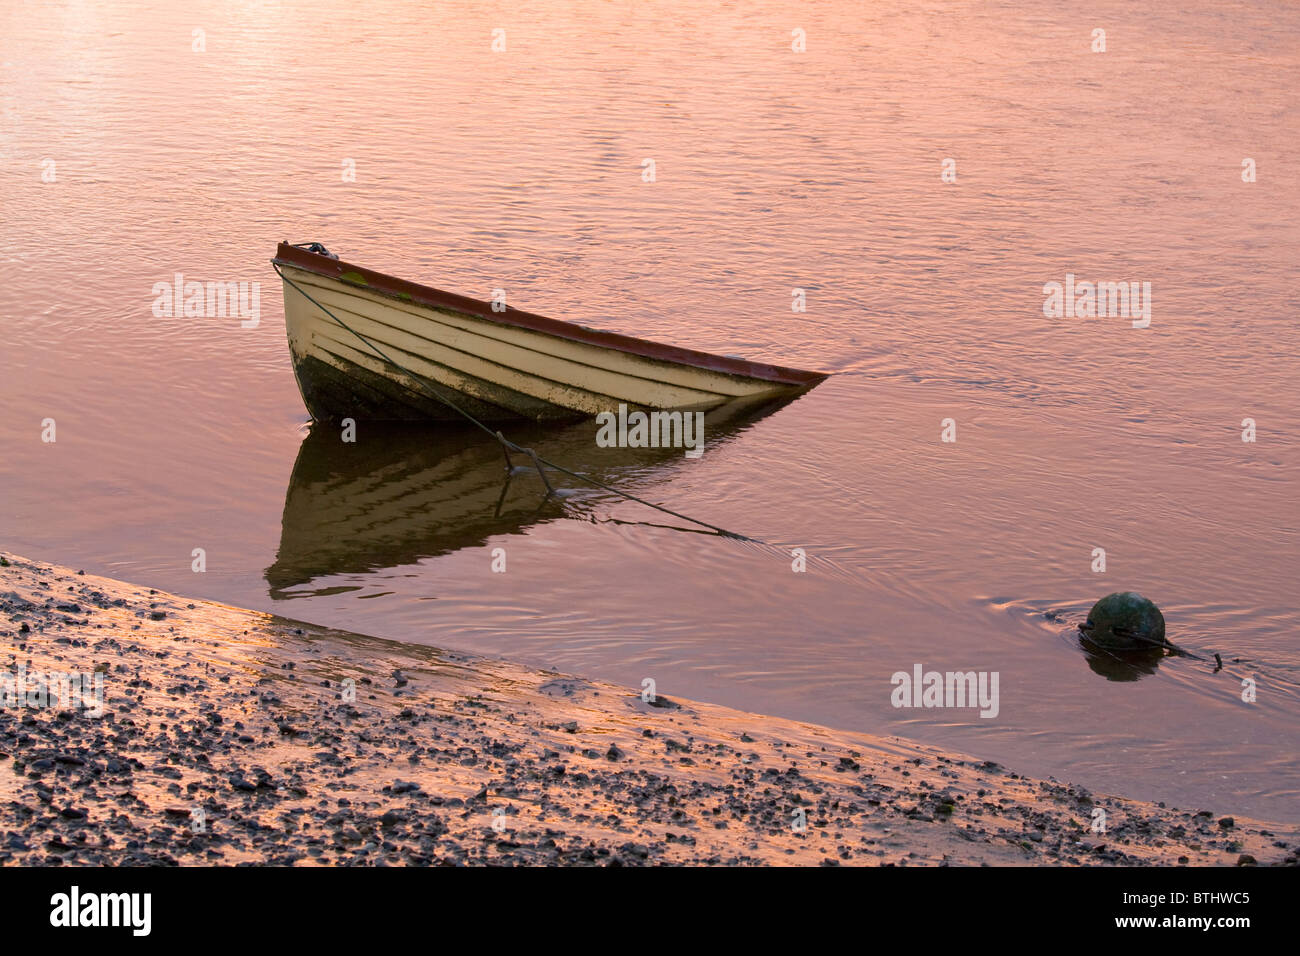 Partly Submerged Rowing Boat at Sunset Stock Photo